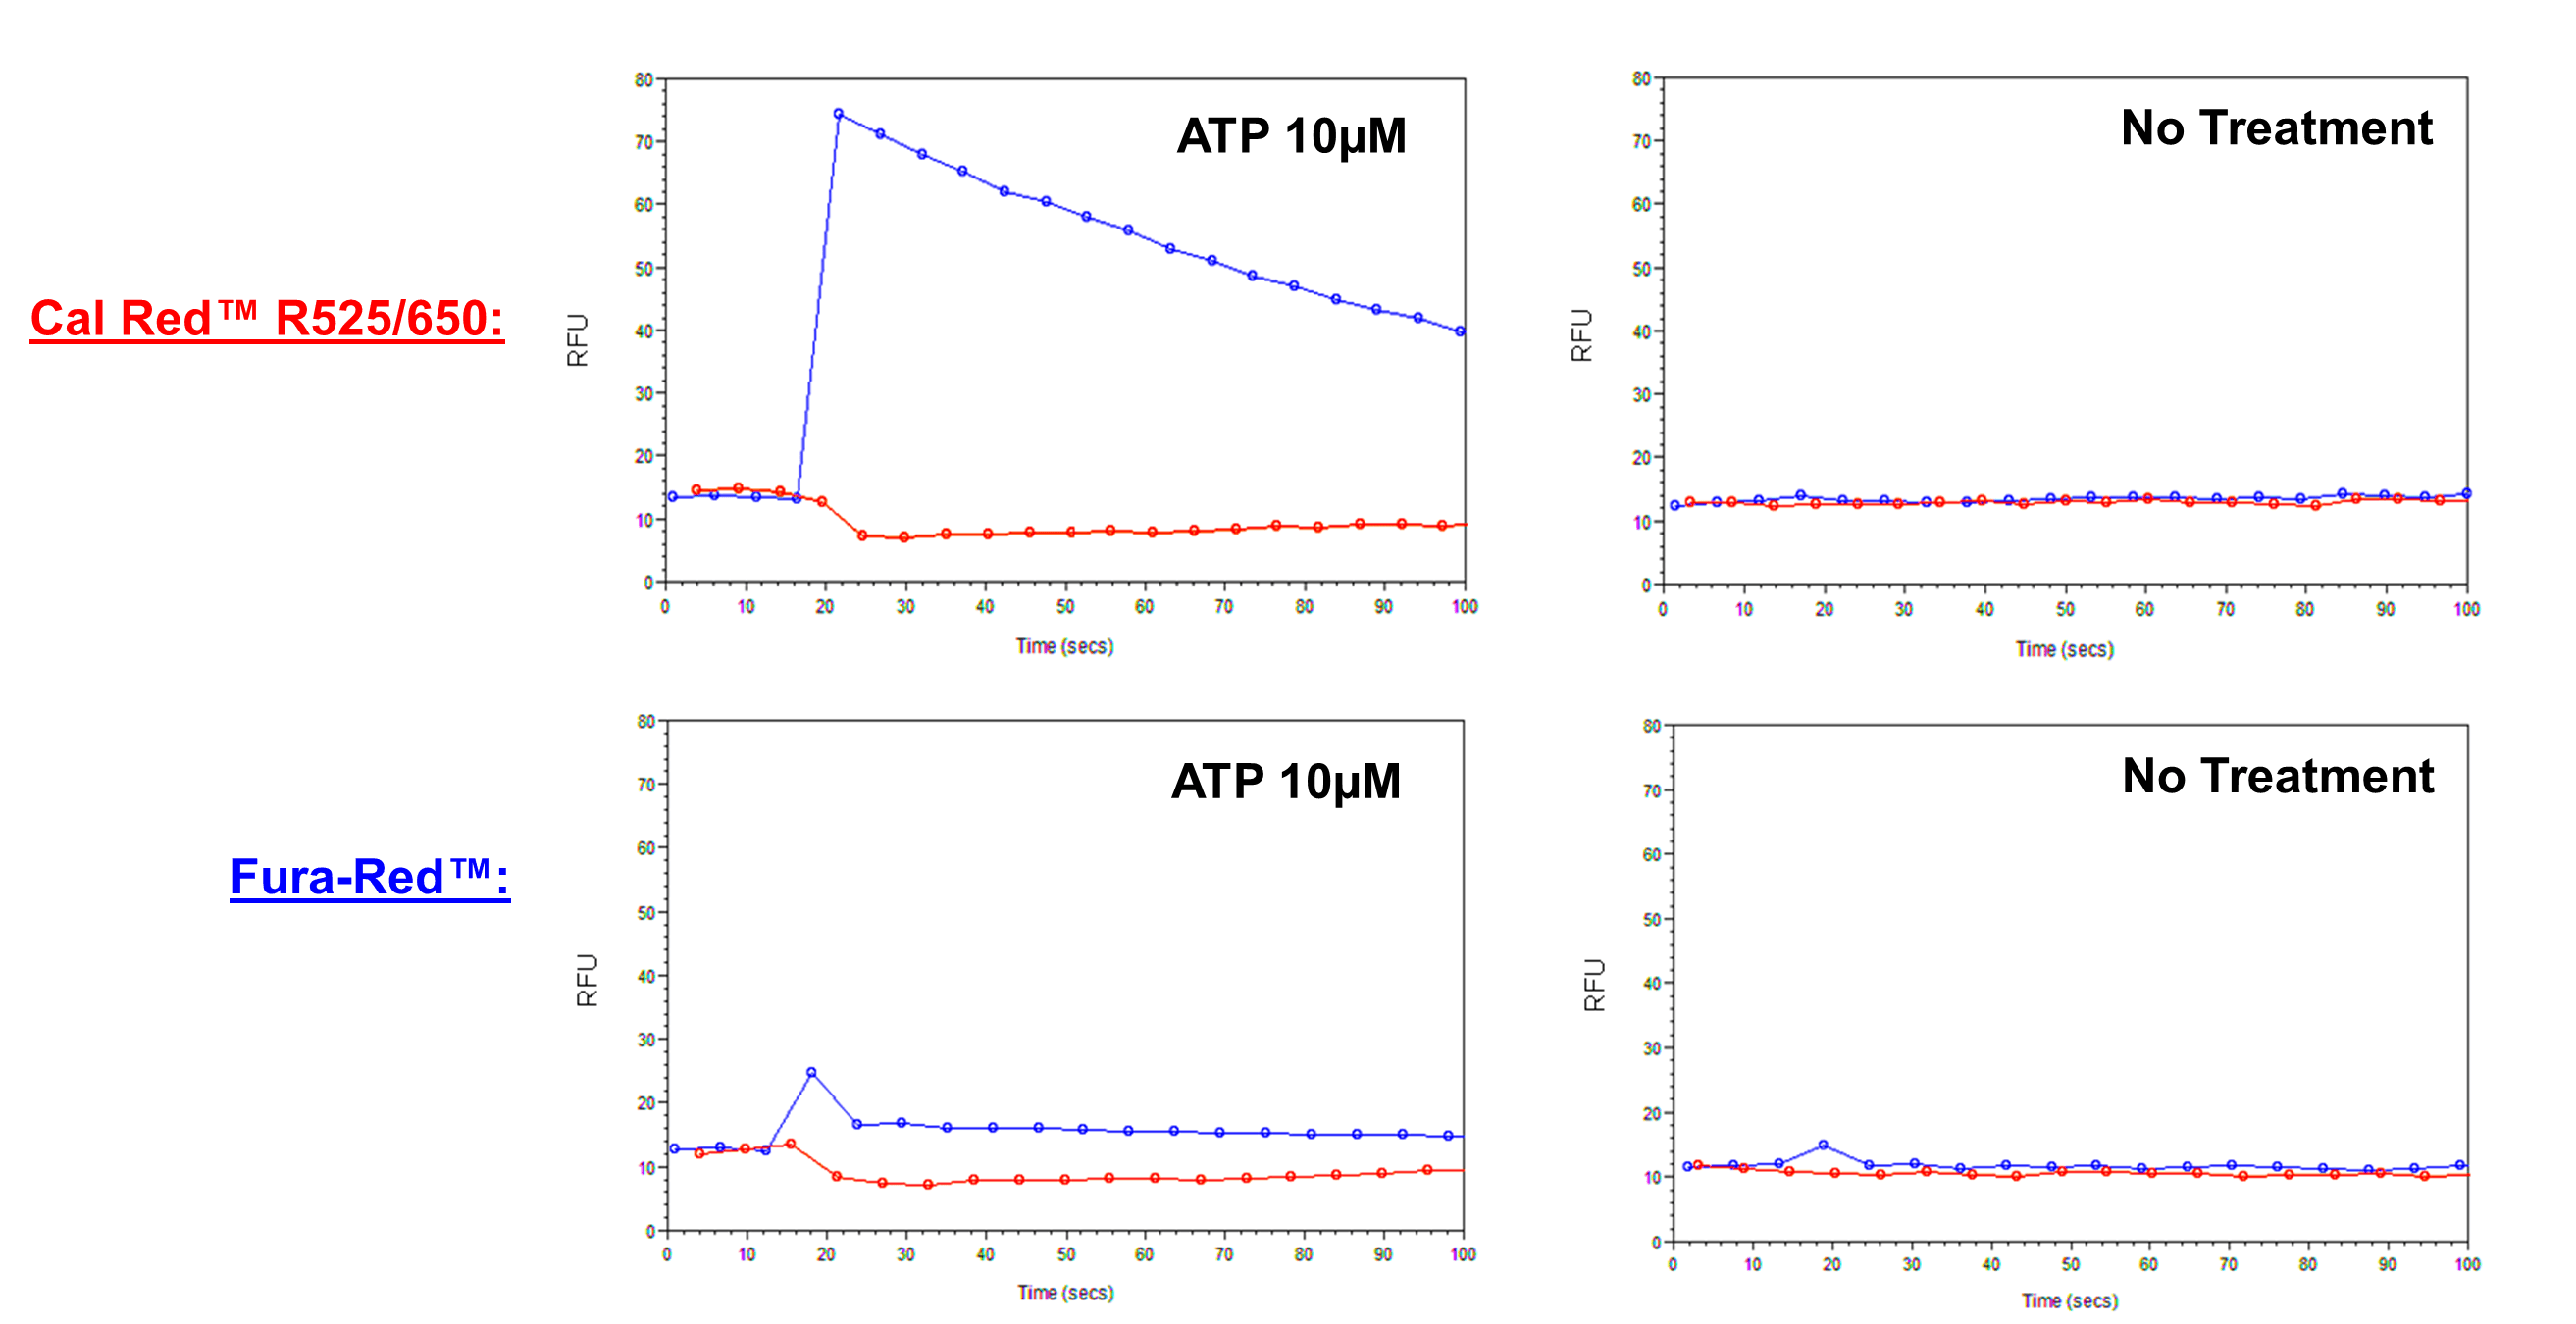 ATP-stimulated calcium response on CHO-K1 cells incubated with Cal Red™ R525/650, AM and Fura-Red™ AM. 10 μM ATP (final concentration in the well) was added by FlexStation 3 (Molecular Devices).